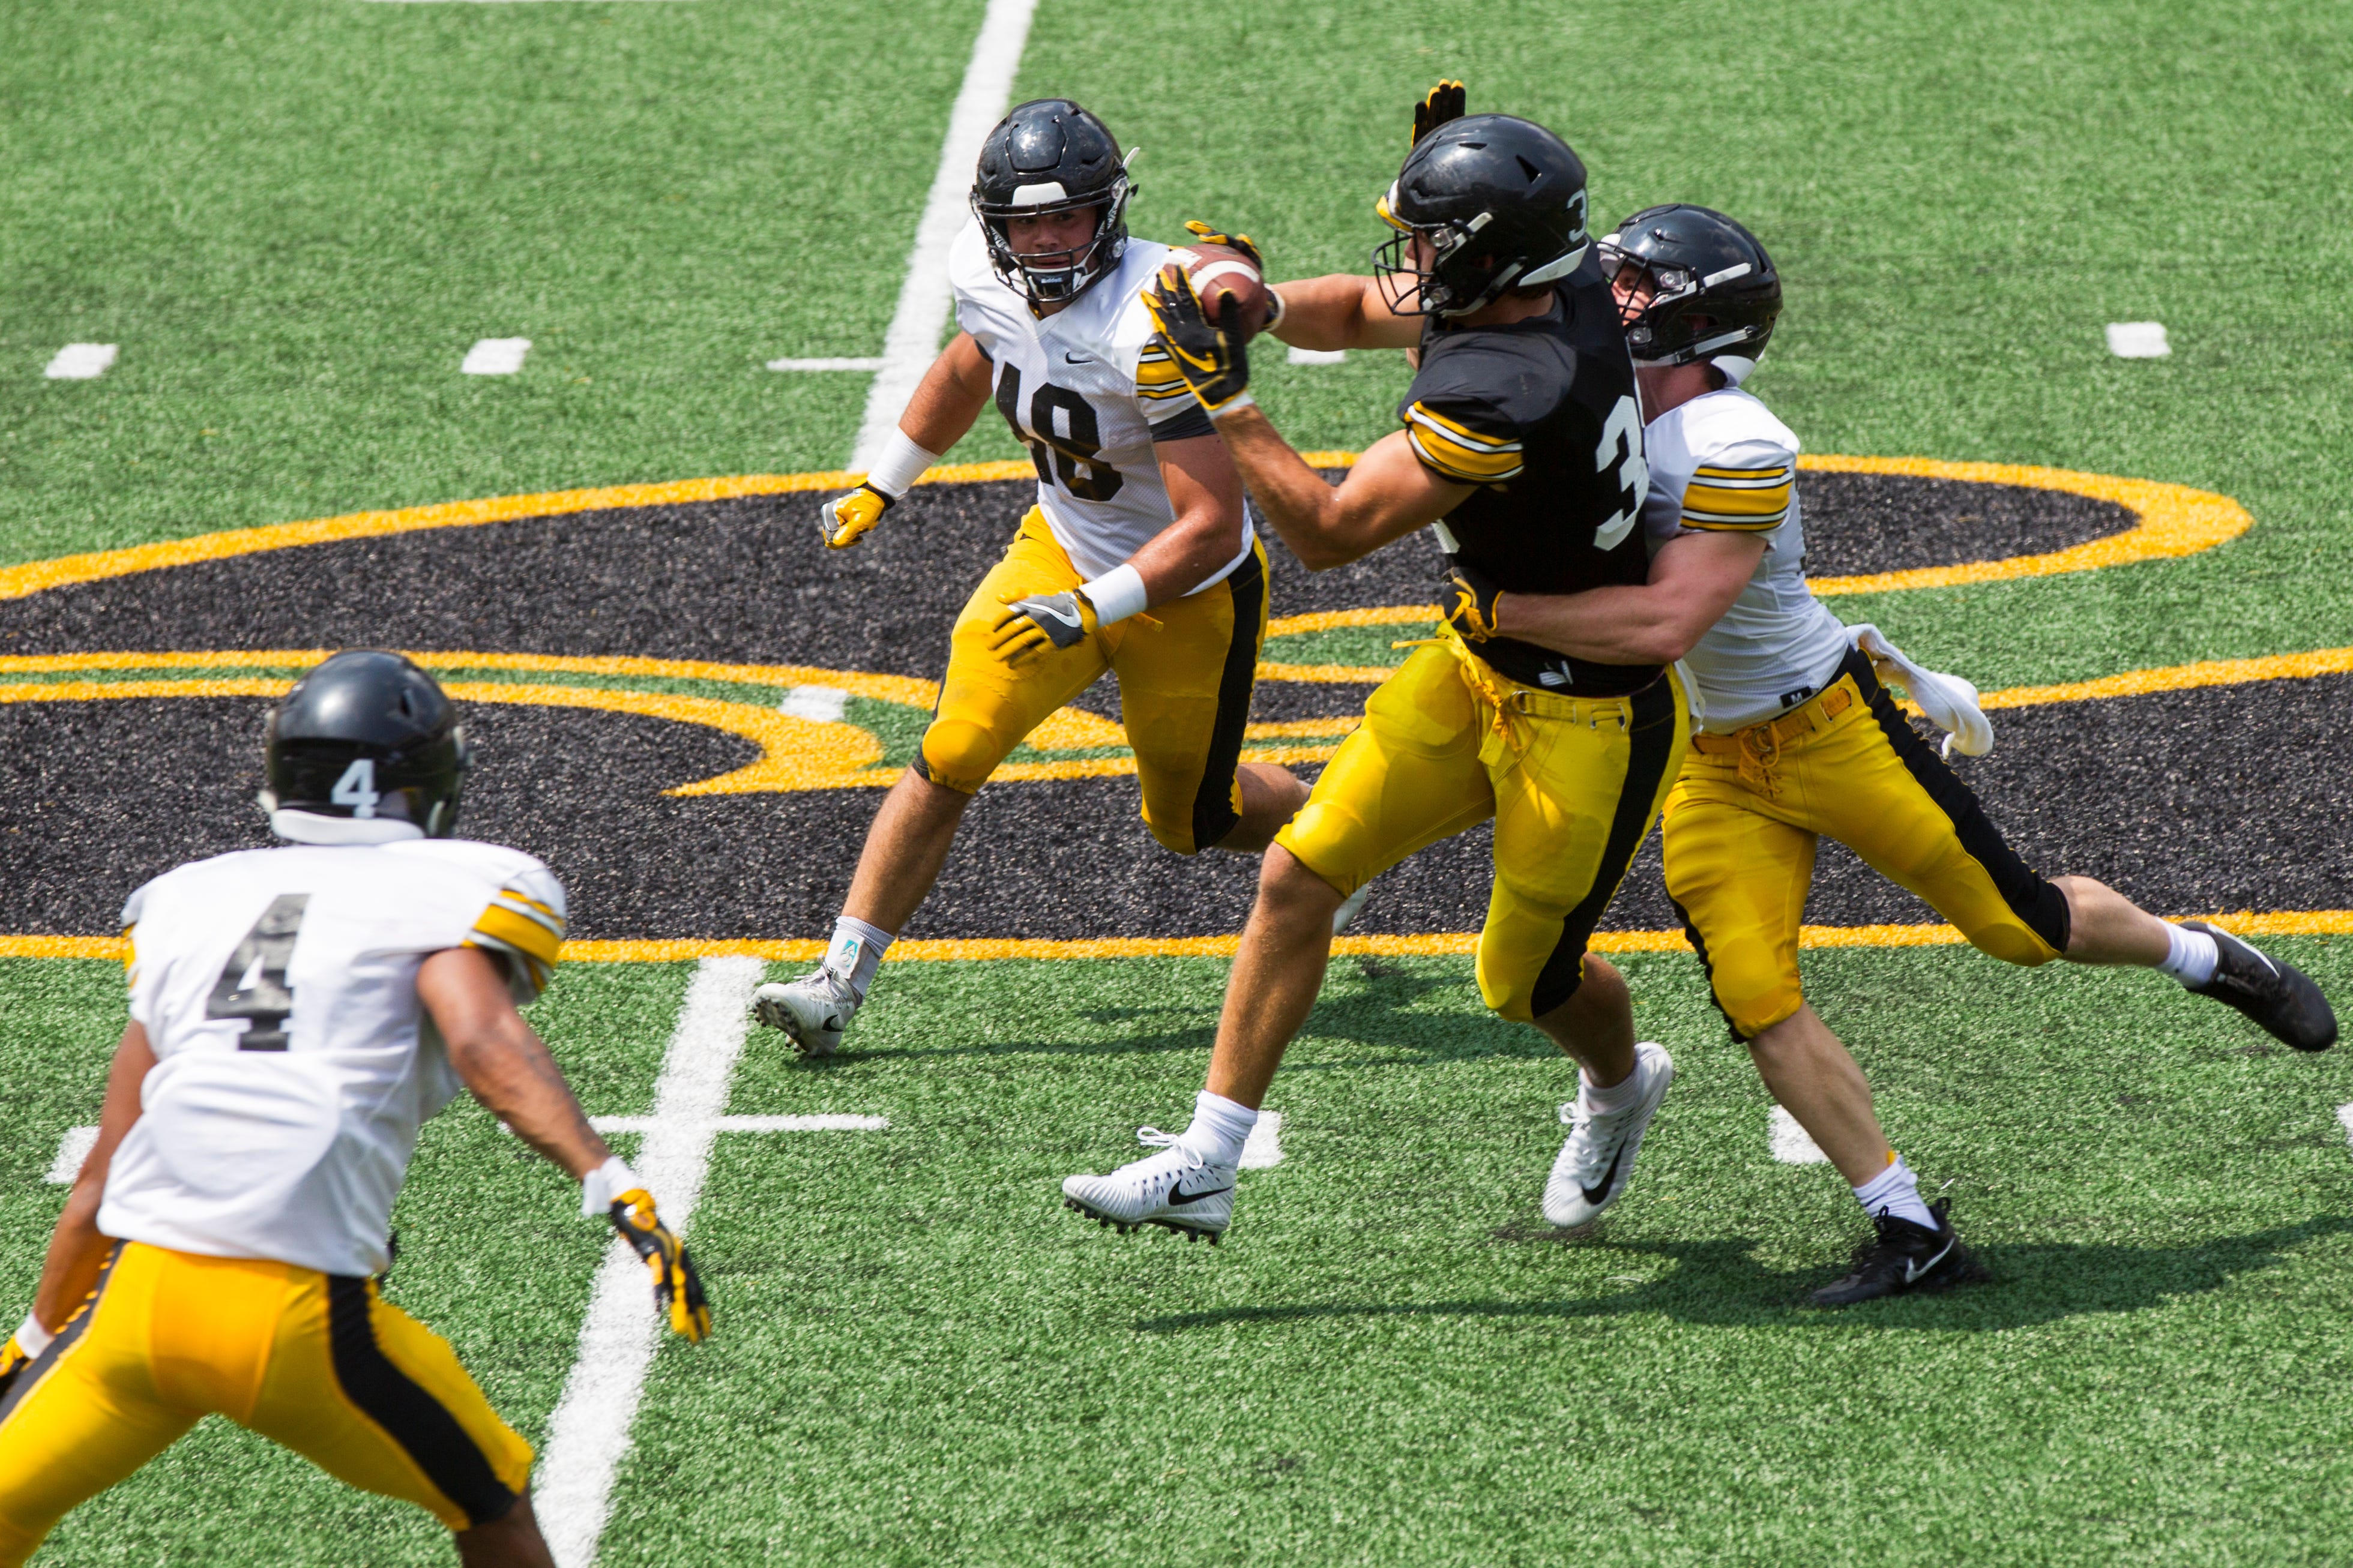 Iowa tight end T.J. Hockenson catches a pass while being covered by defensive back John Milani and during a Kids Day practice on Saturday, Aug. 11, 2018, at Kinnick Stadium in Iowa City.